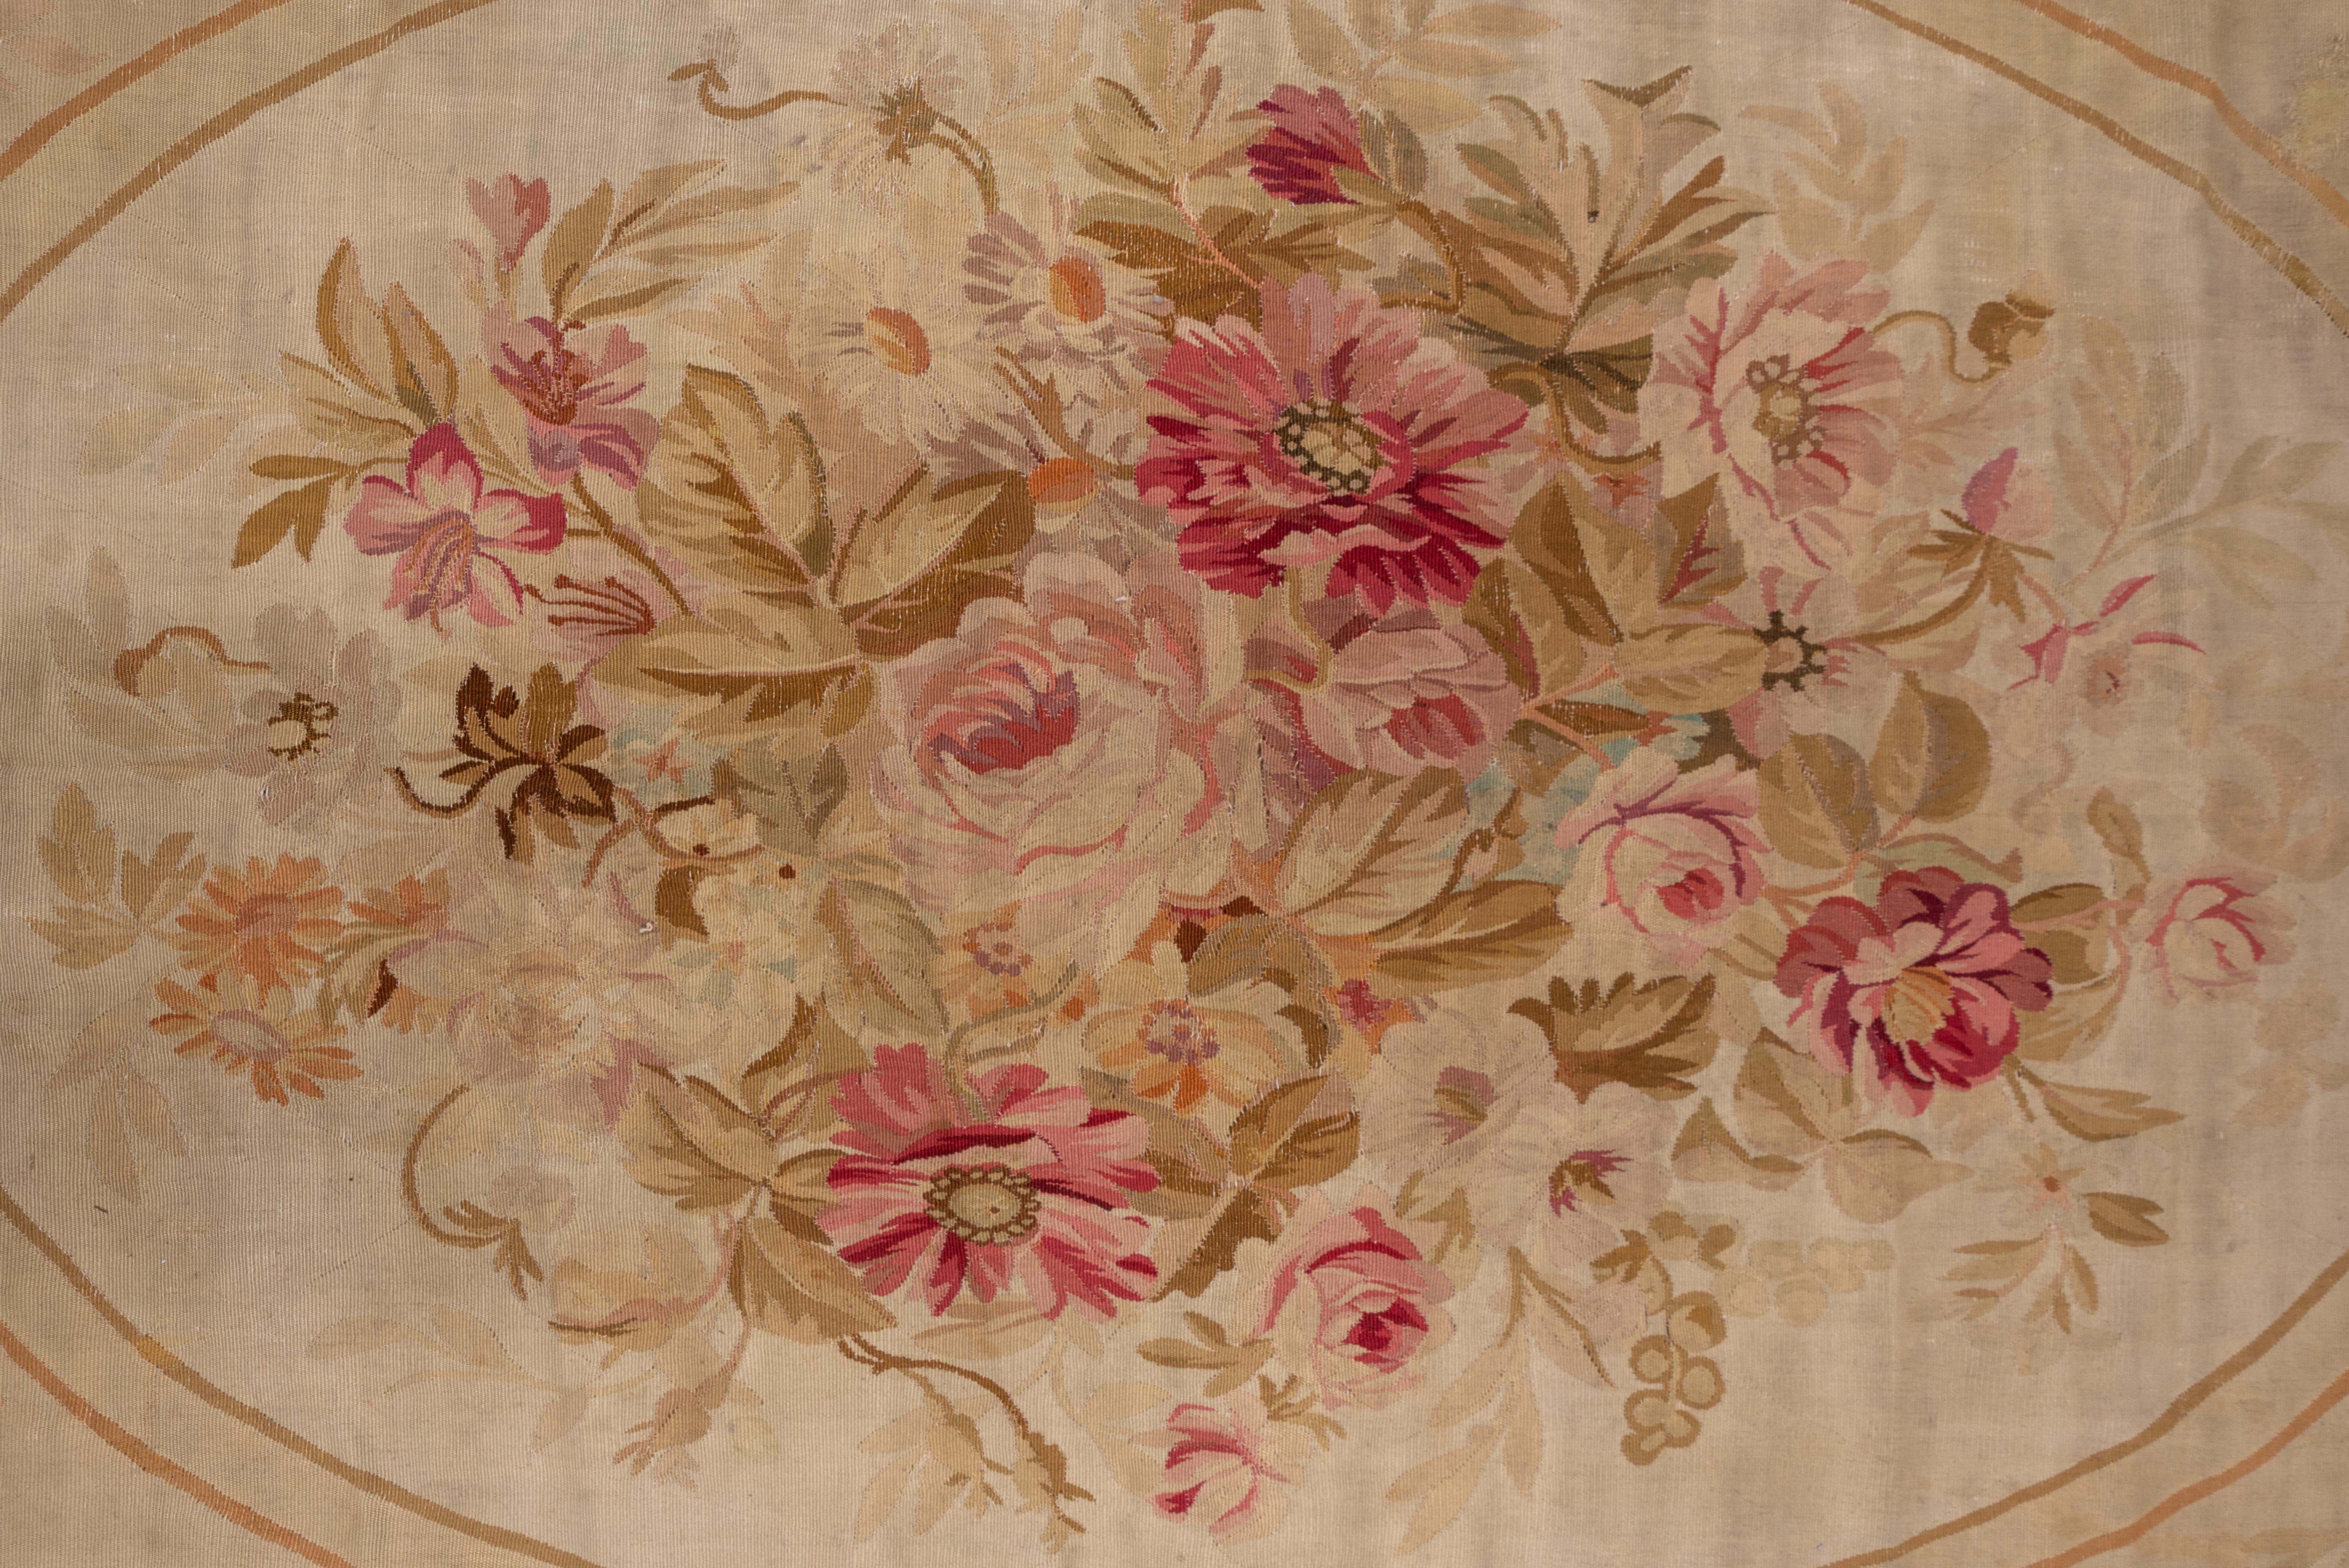 Hand-Woven Antique French Aubusson Carpet, circa 1900s For Sale